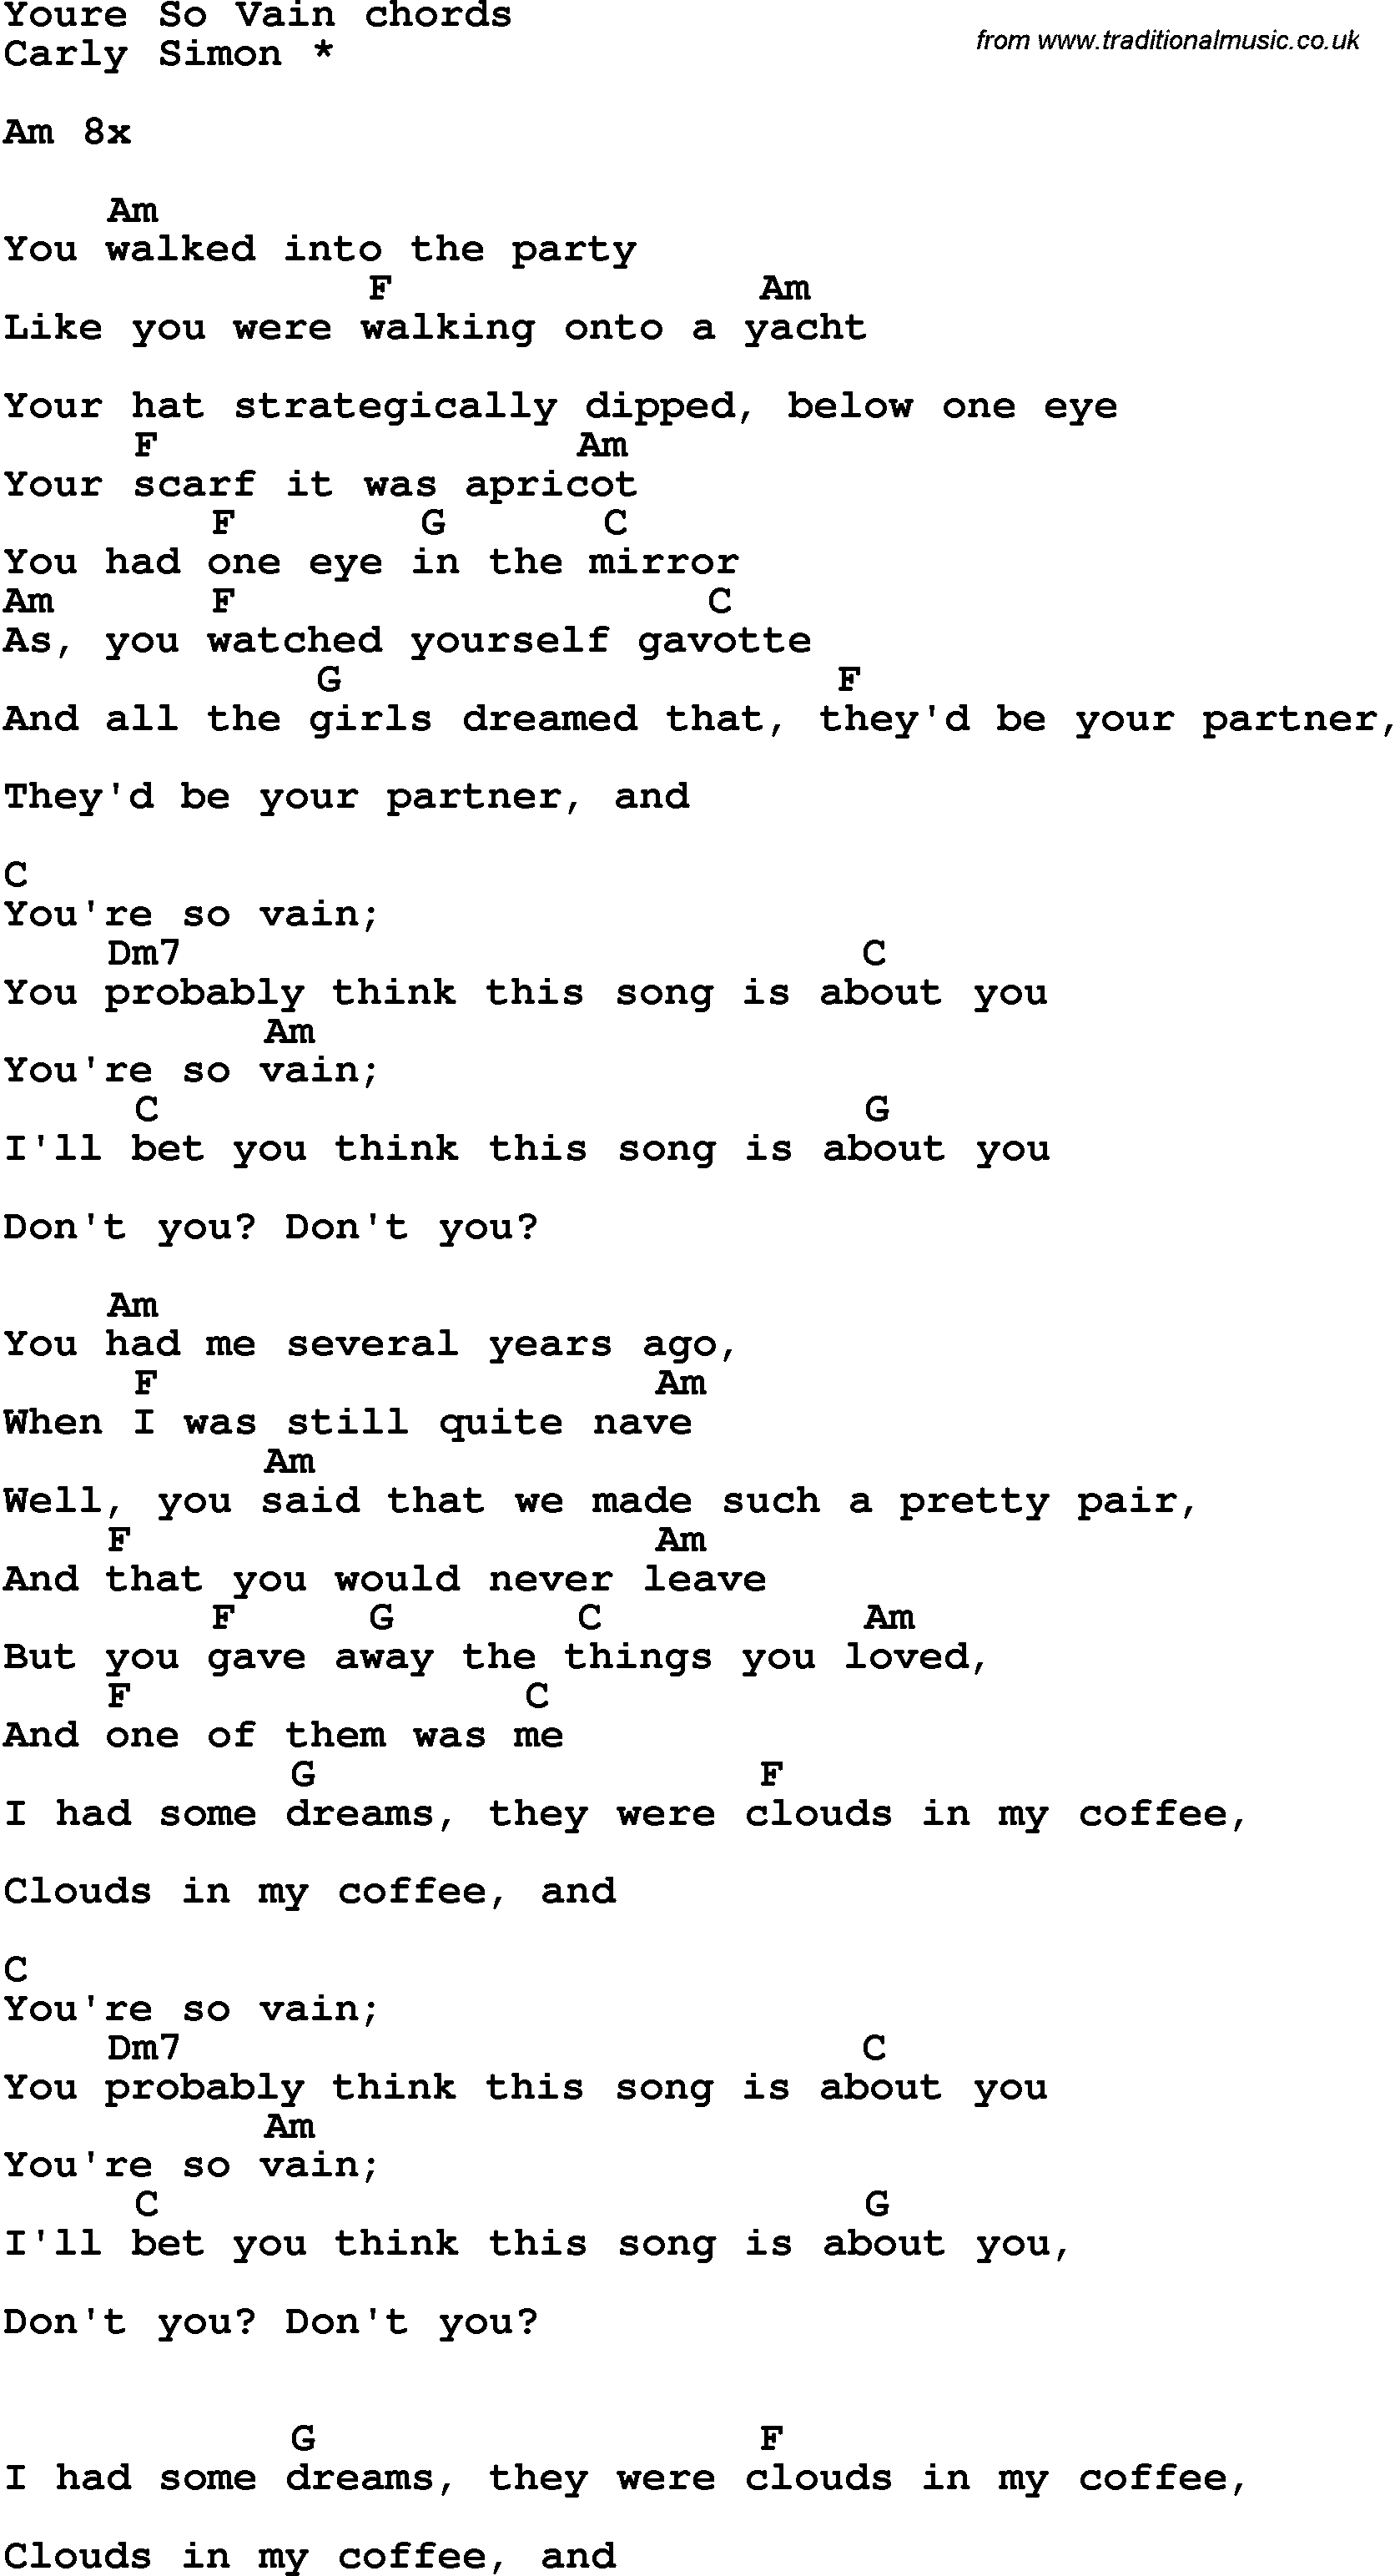 Song Lyrics With Guitar Chords For Youre So Vain